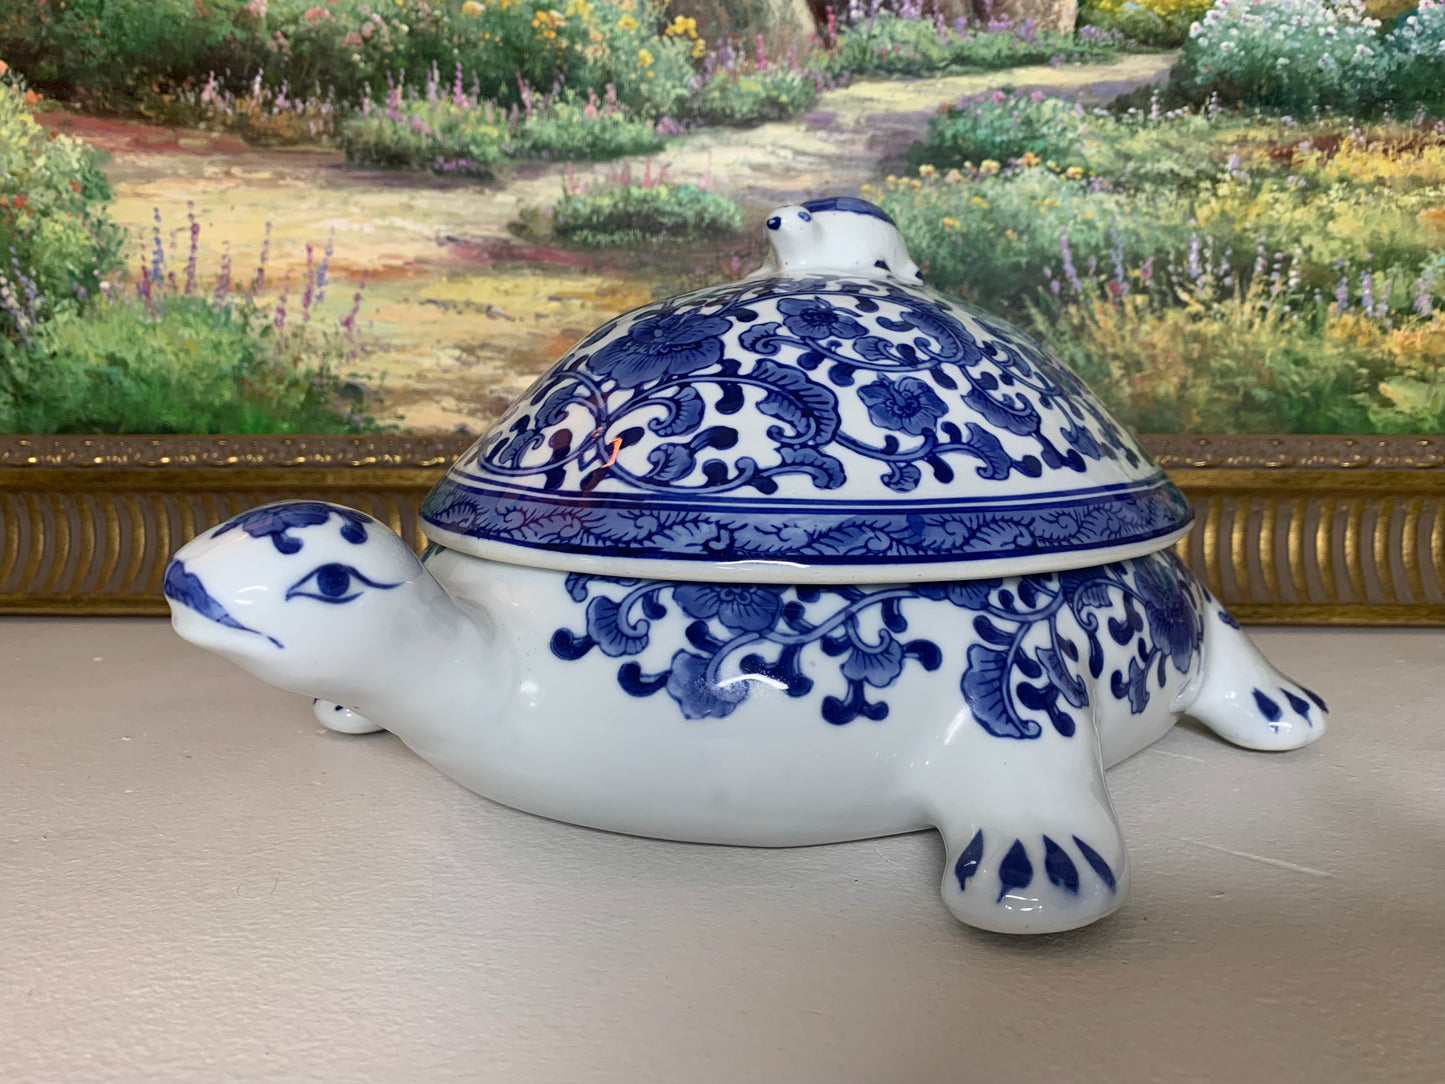 Chinoiserie blue and white extra large covered turtle - Excellent condition!